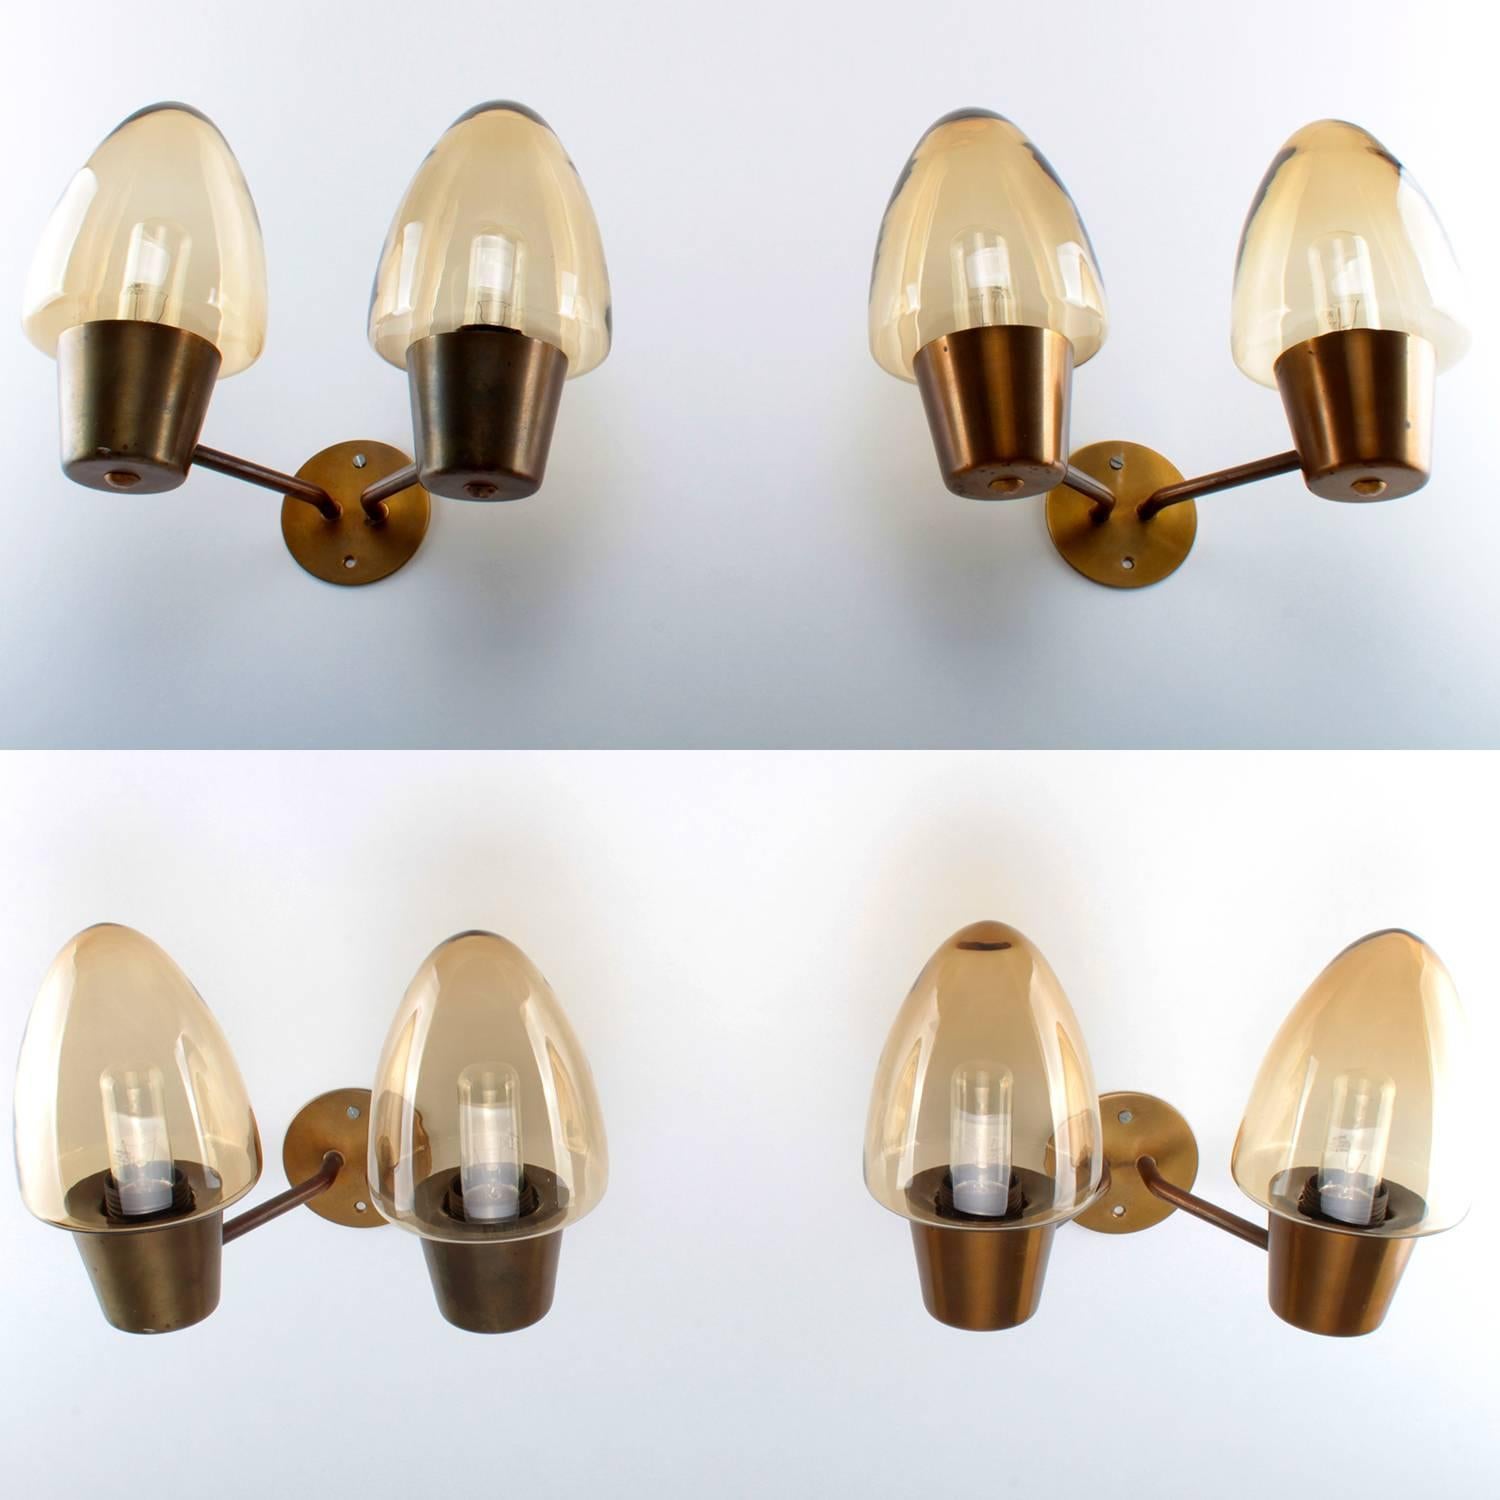 Swedish Crystal Glass Sconces, Pair by Hans-Agne Jakobsson, 1960s, Gorgeous Wall Lamps